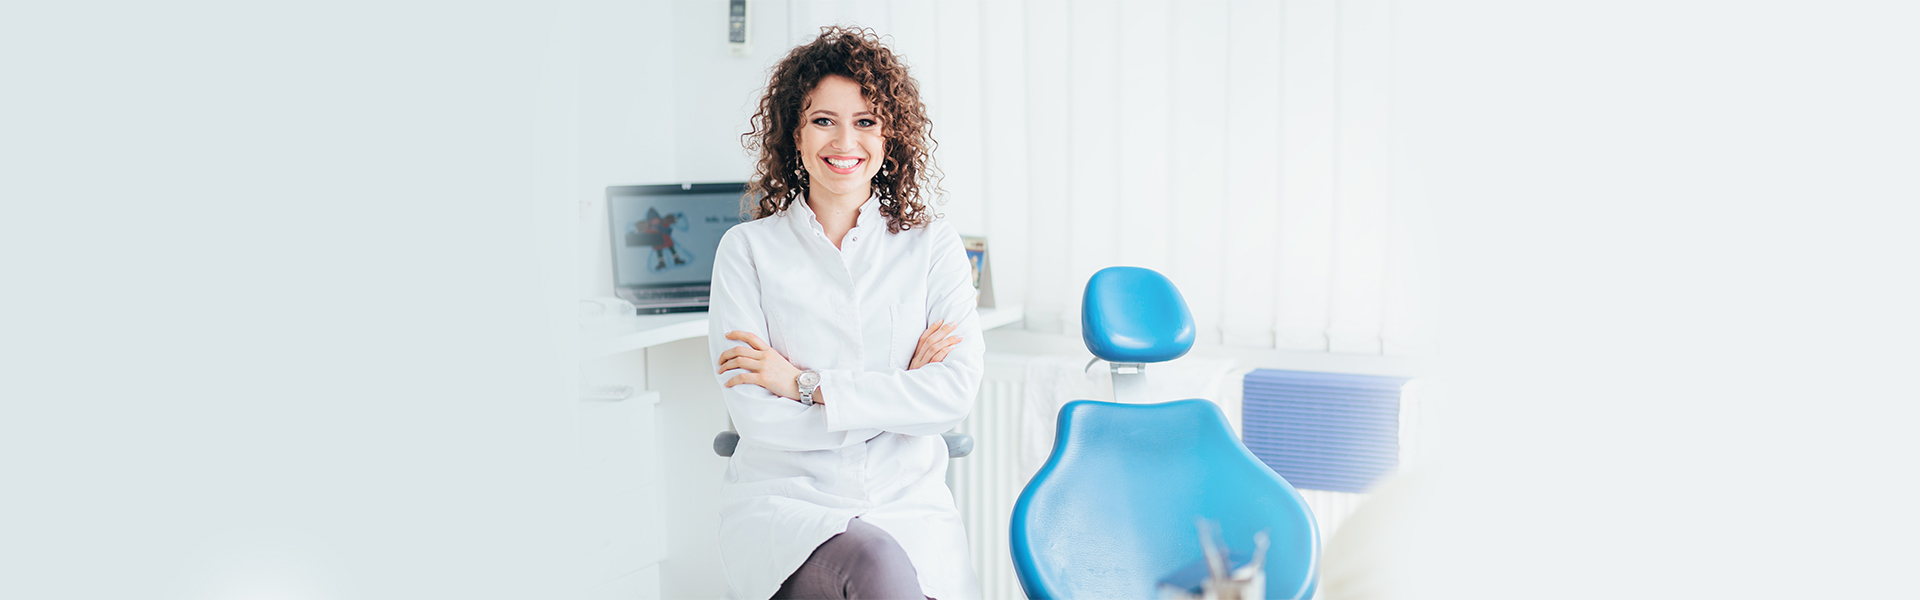 When Do You Need An Emergency Dentist?